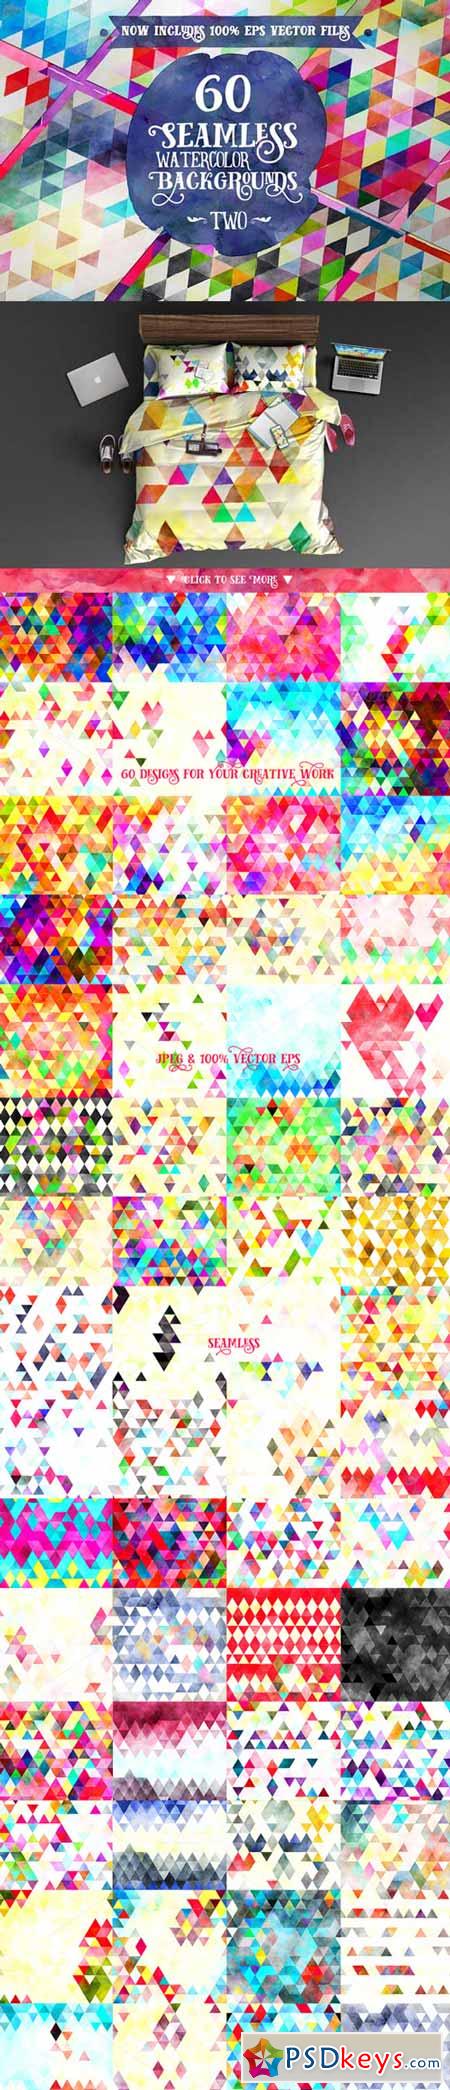 60 Seamless Watercolor Backgrounds 2 245280